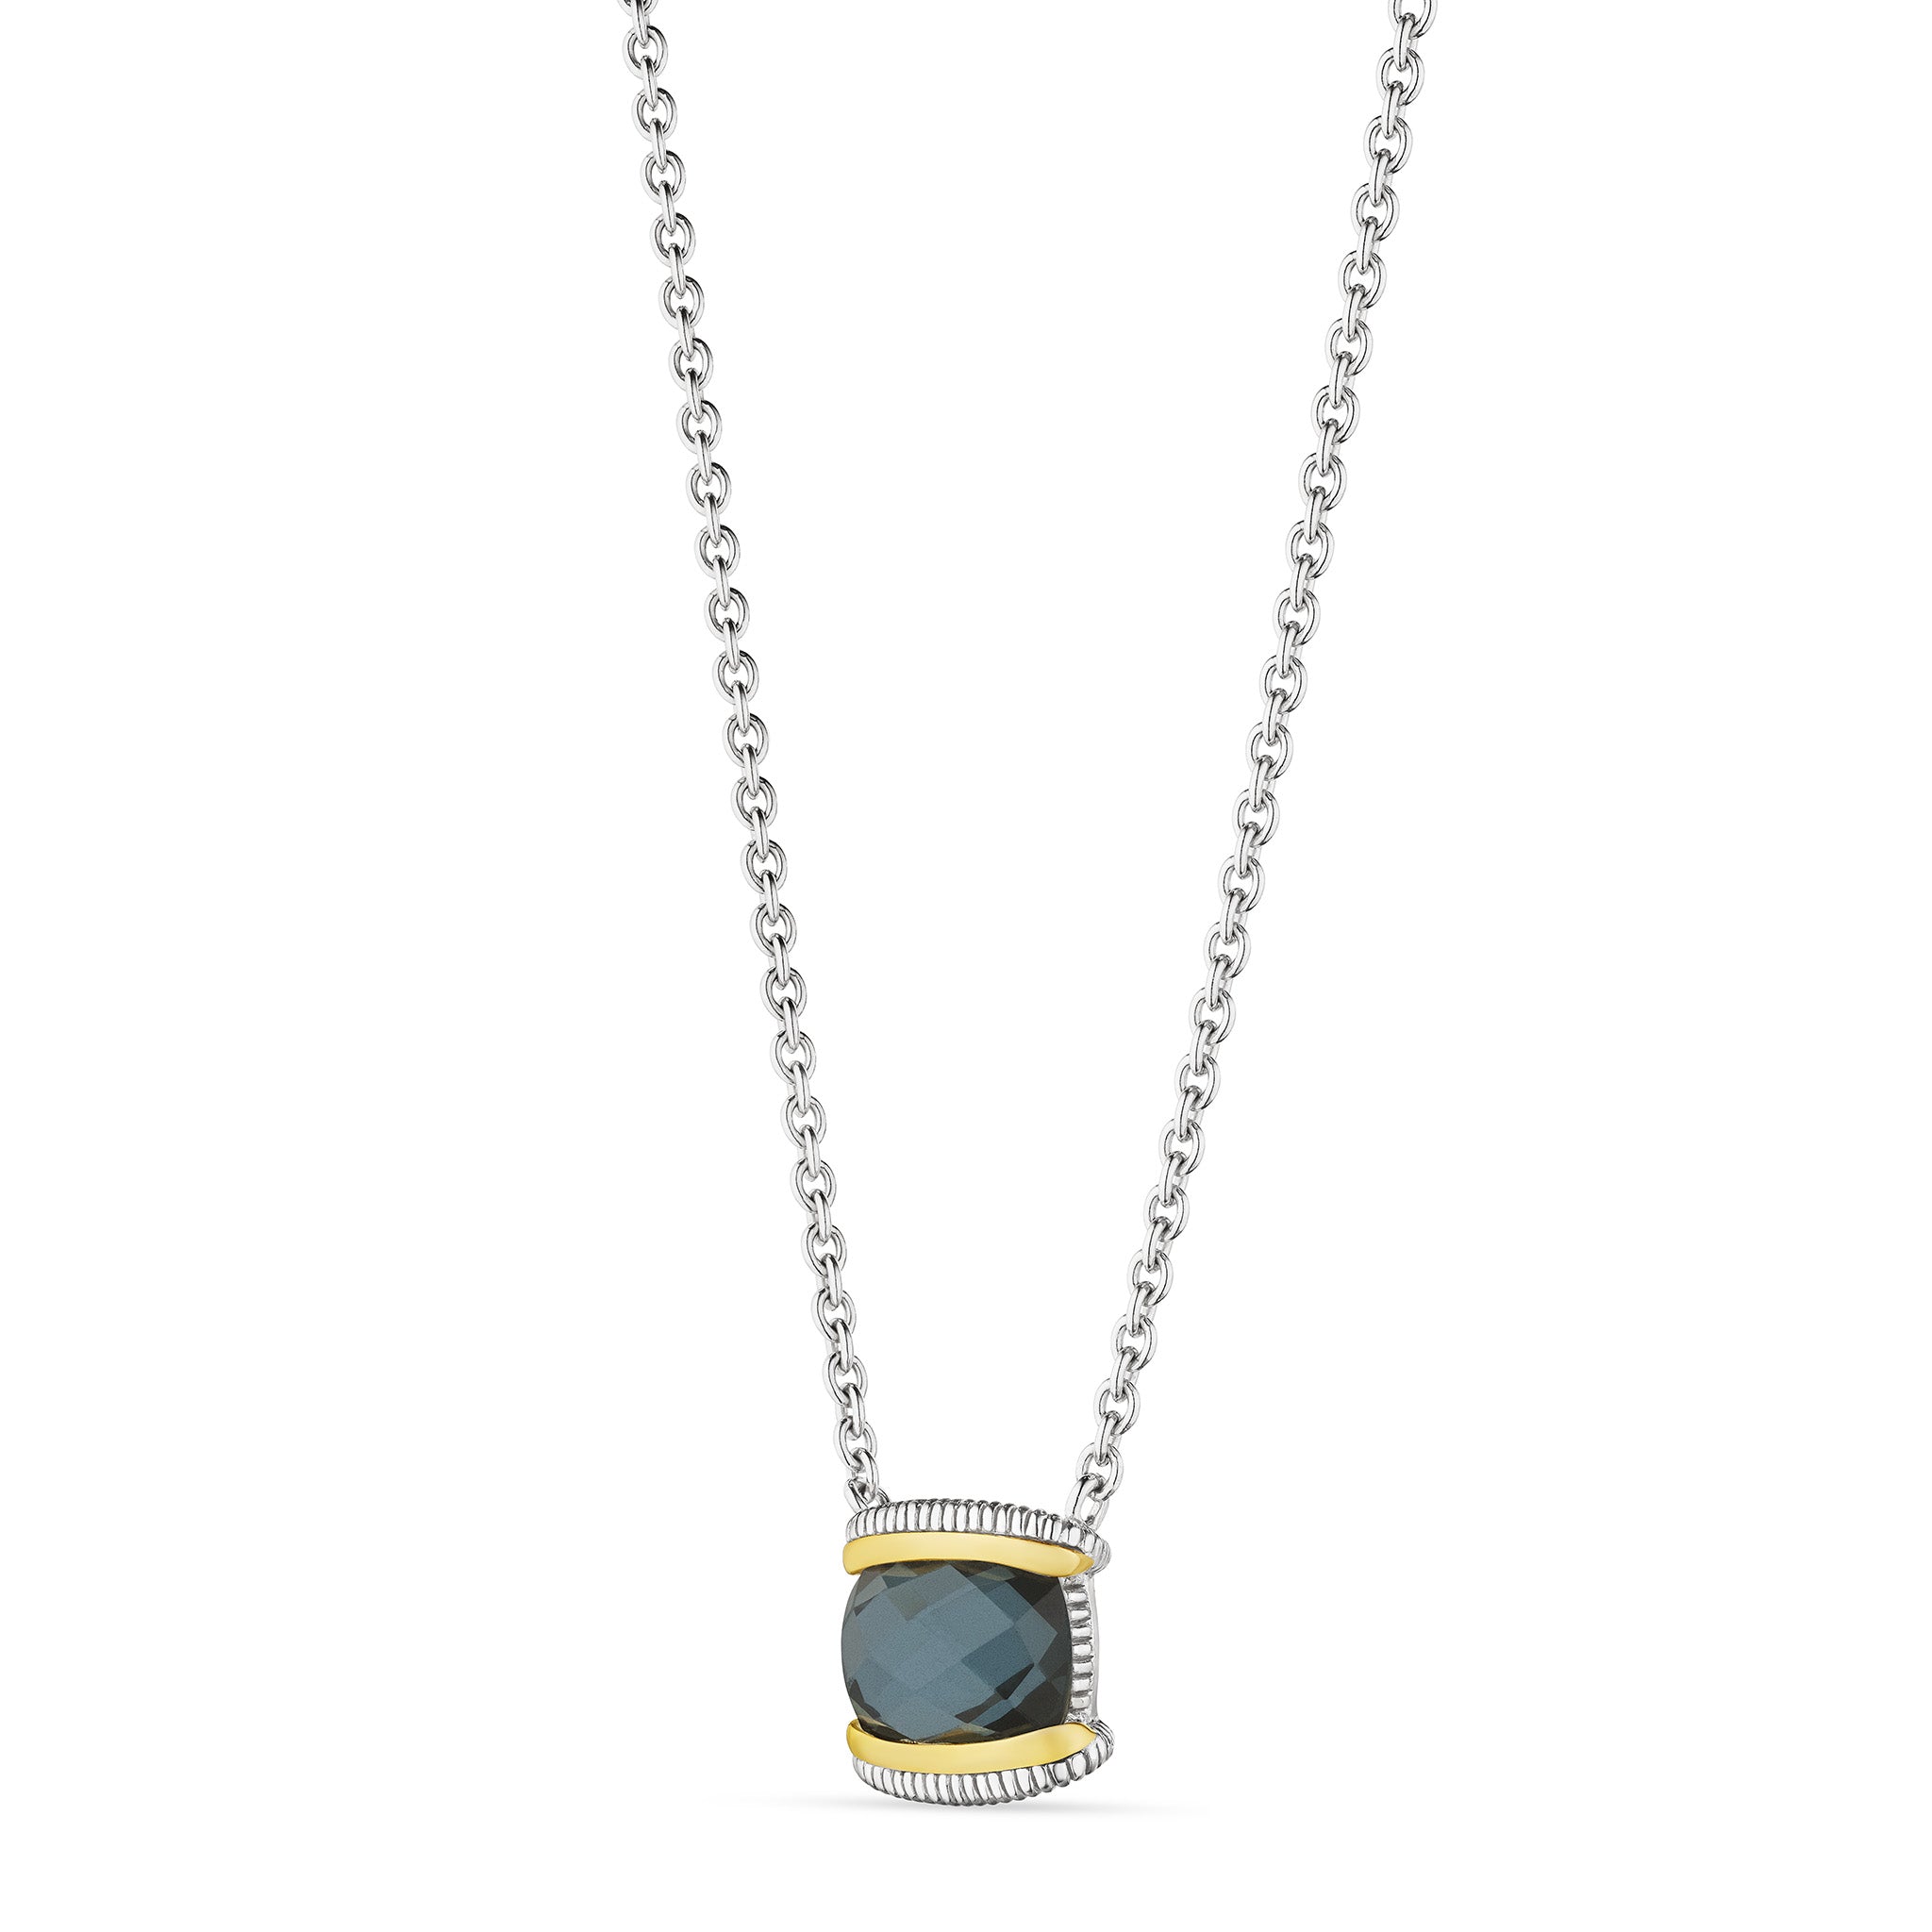 Eternity Necklace With Blue Quartz Over Hematite Doublet And 18K Gold